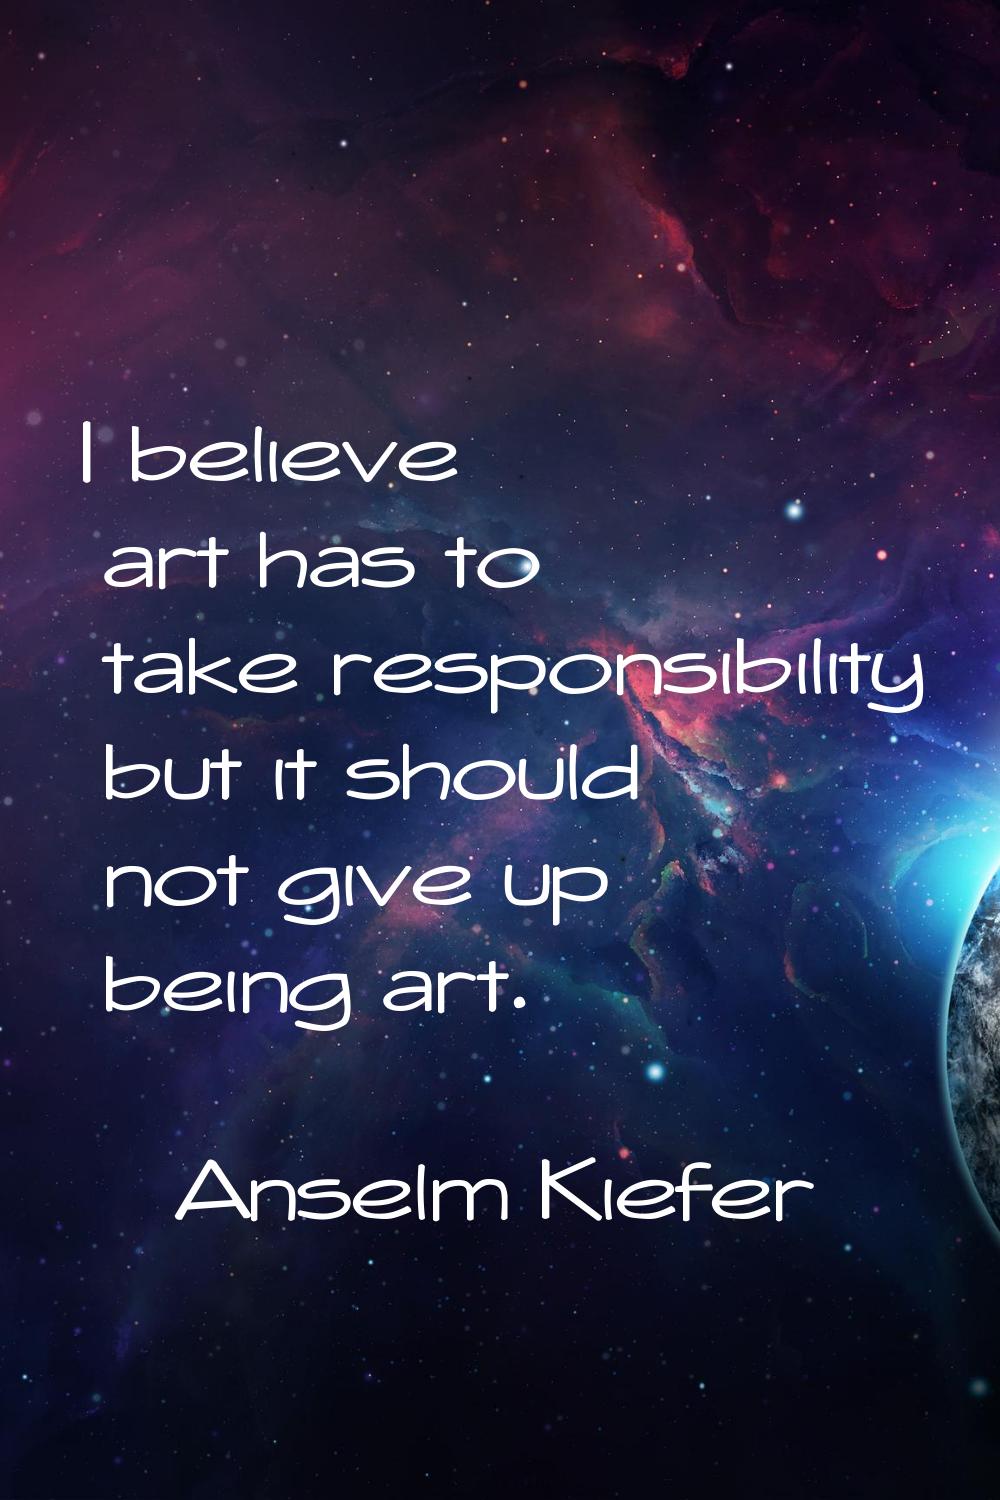 I believe art has to take responsibility but it should not give up being art.